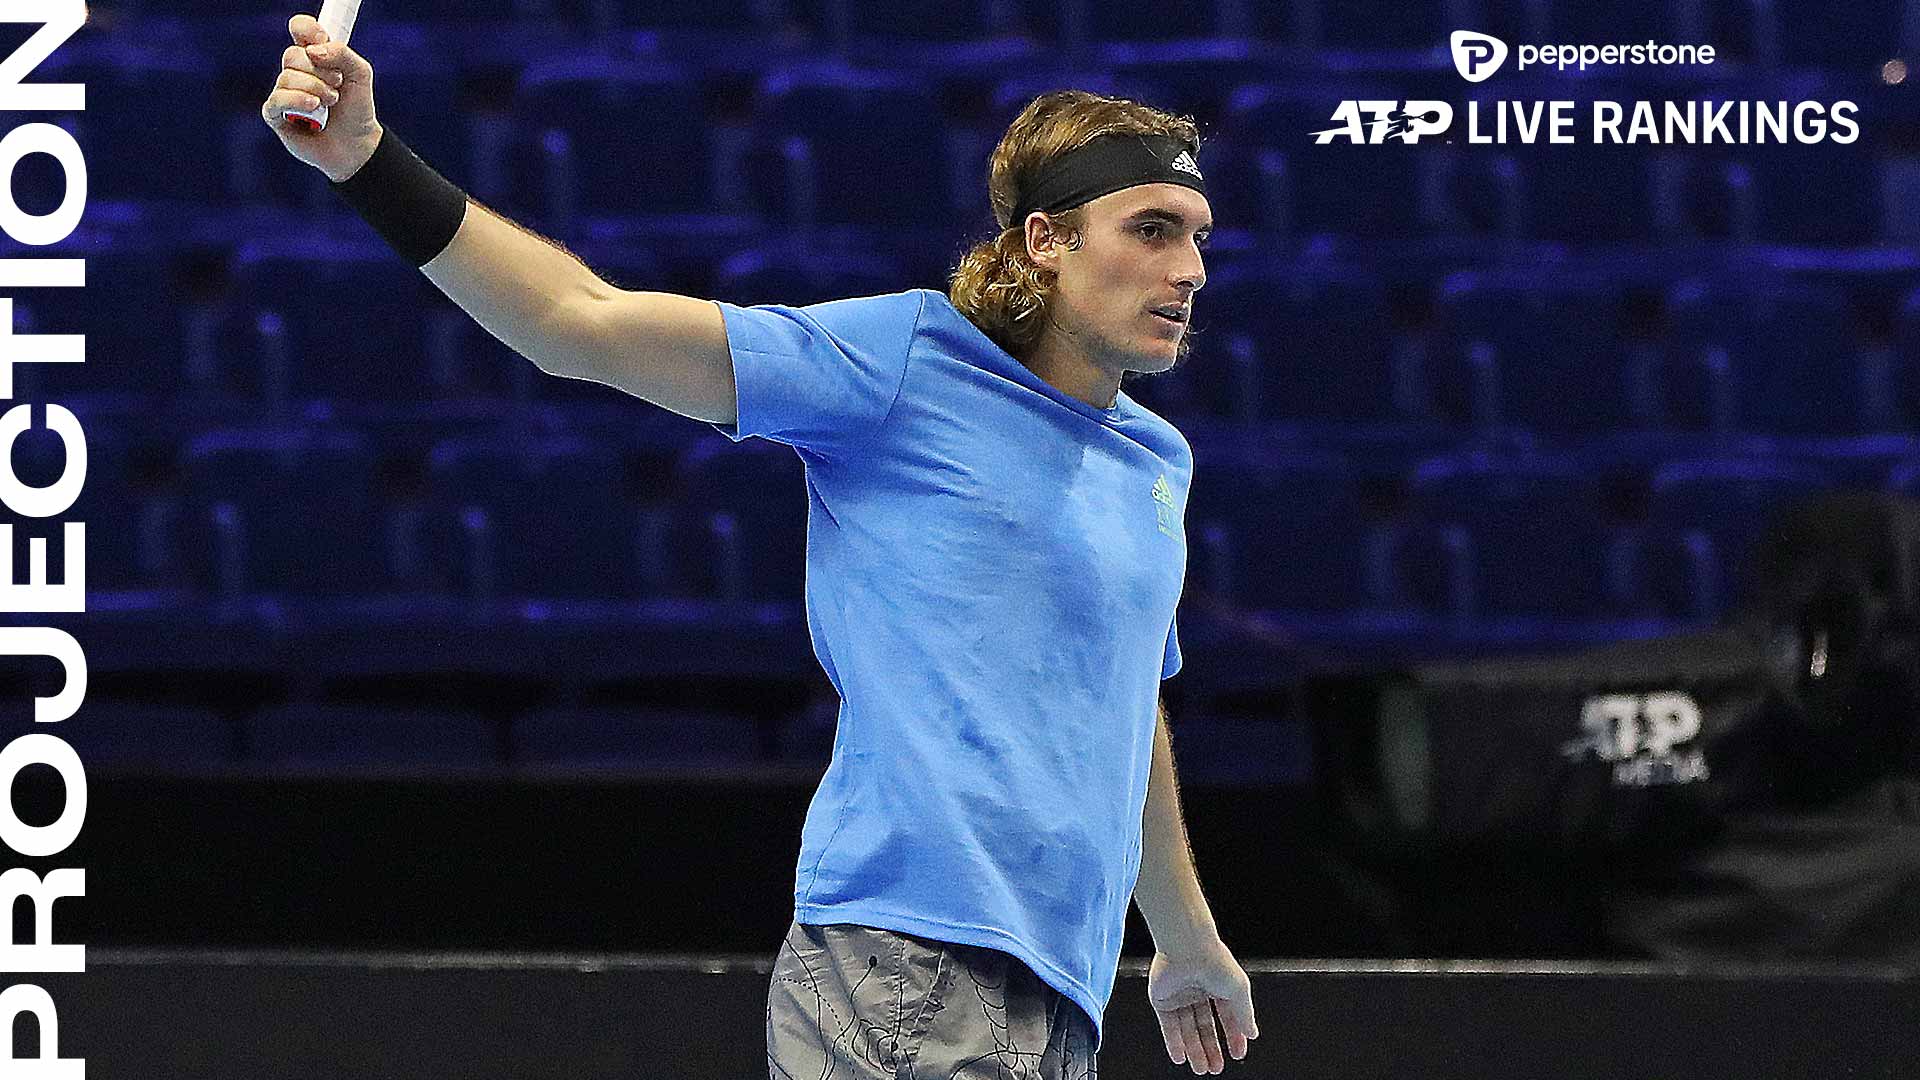 Stefanos Tsitsipas will try to climb to World No. 1 in the Pepperstone ATP Rankings for the first time.